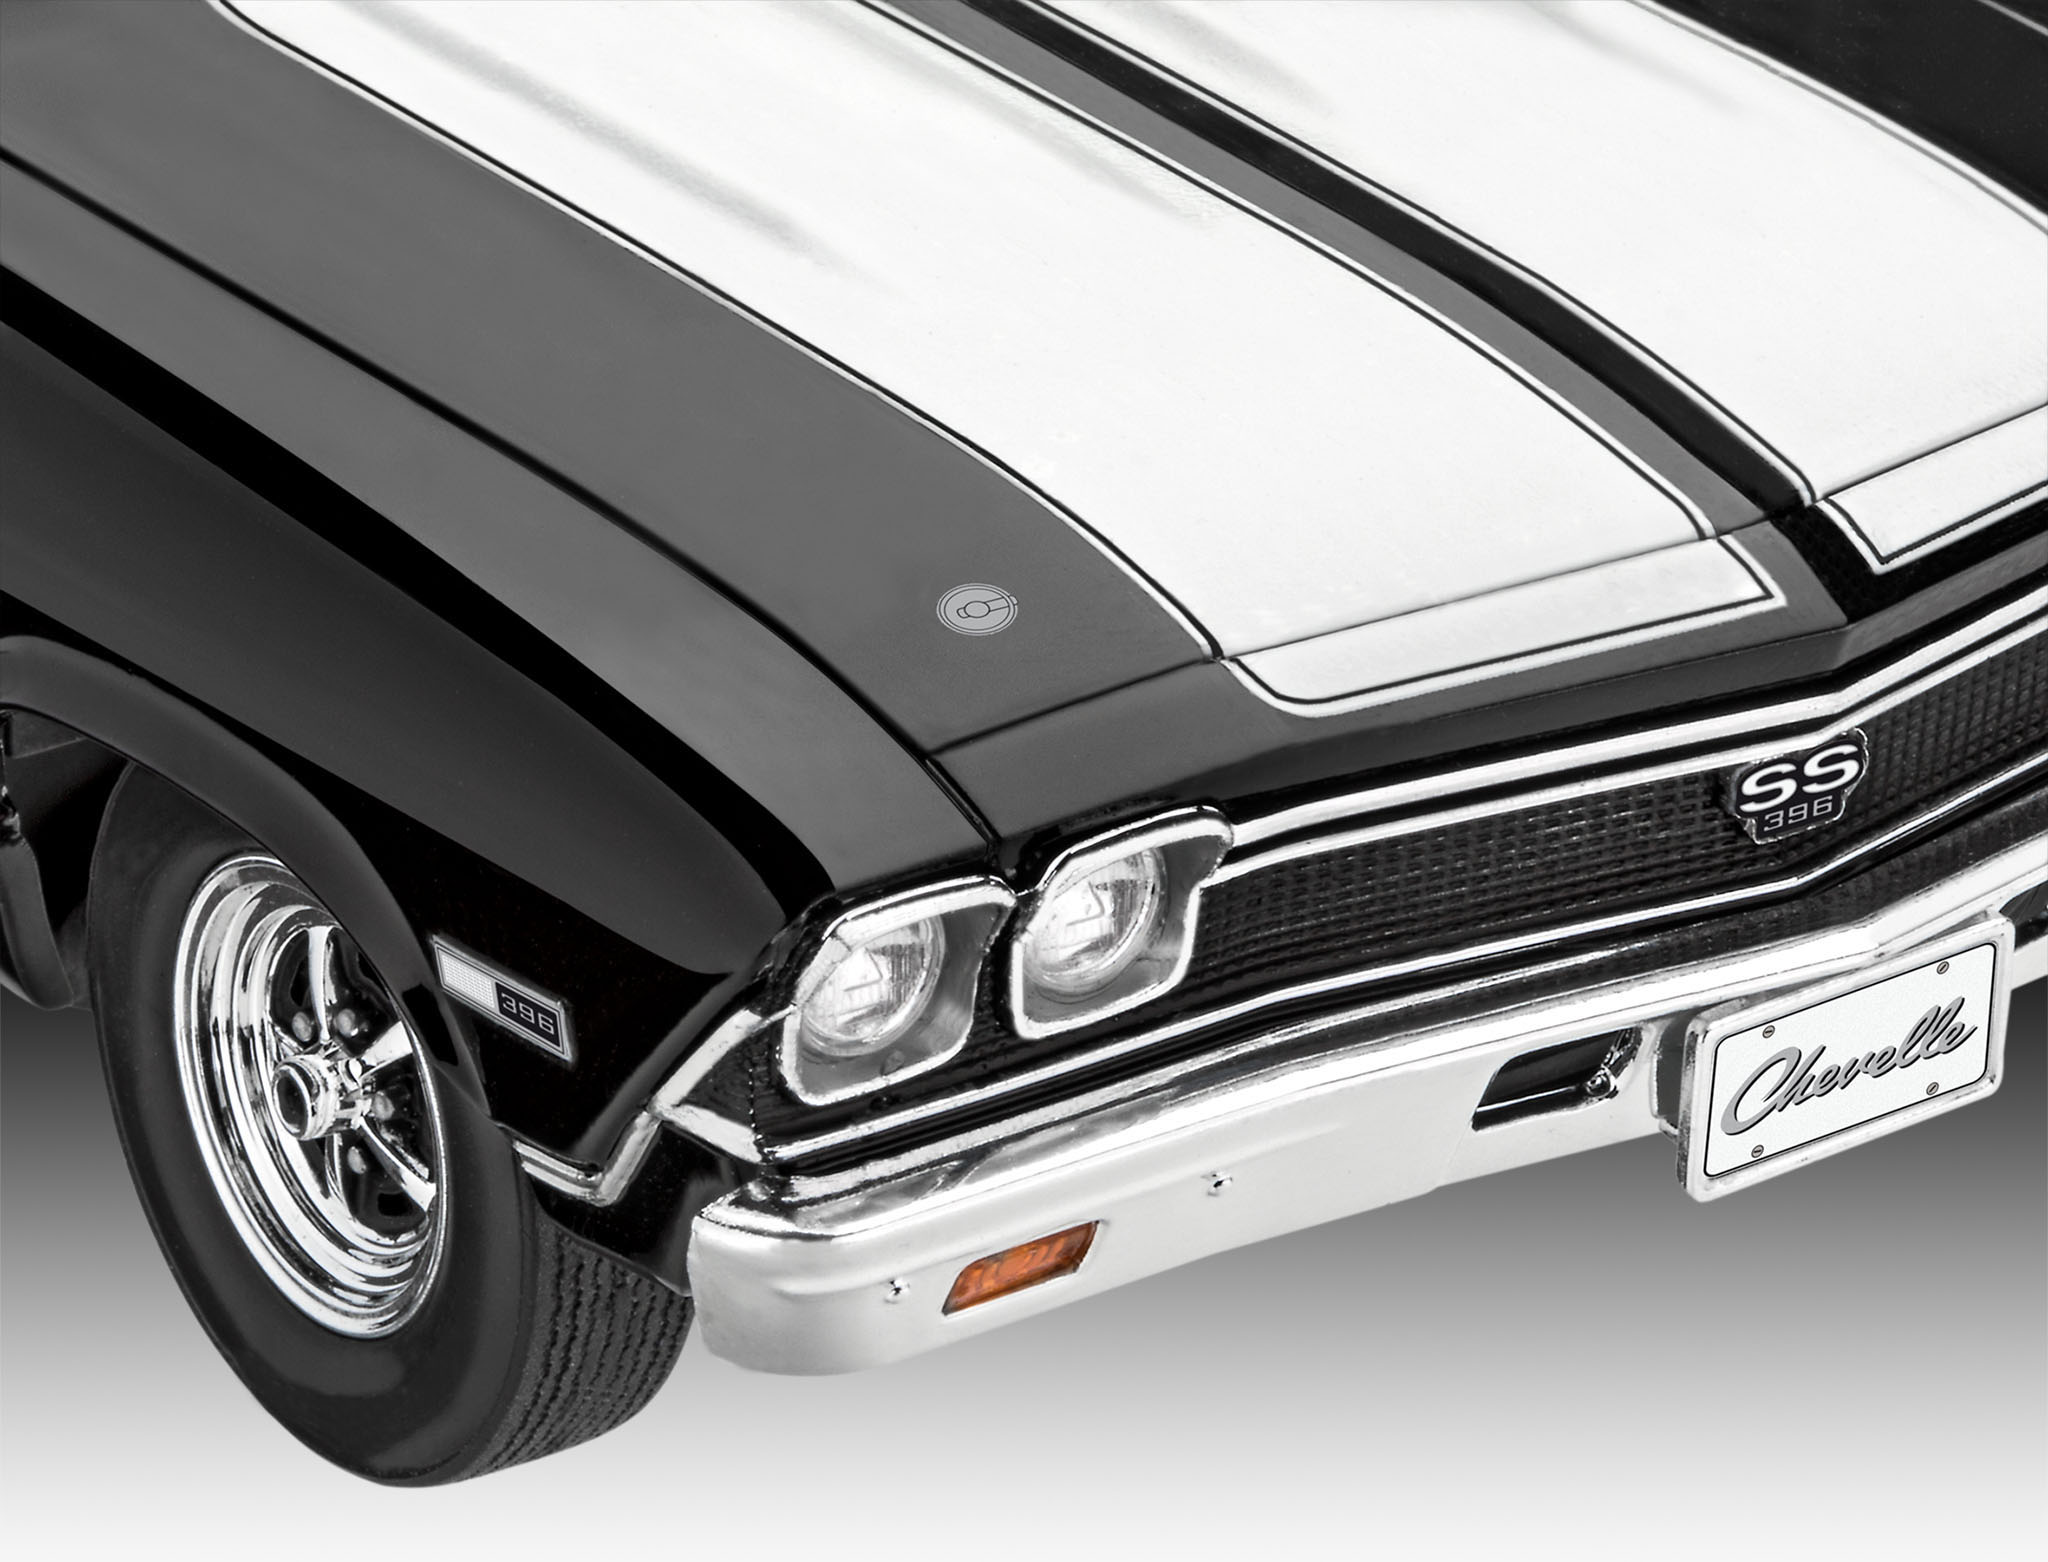 1968 Chevy Chevelle©SS 396 - 07662